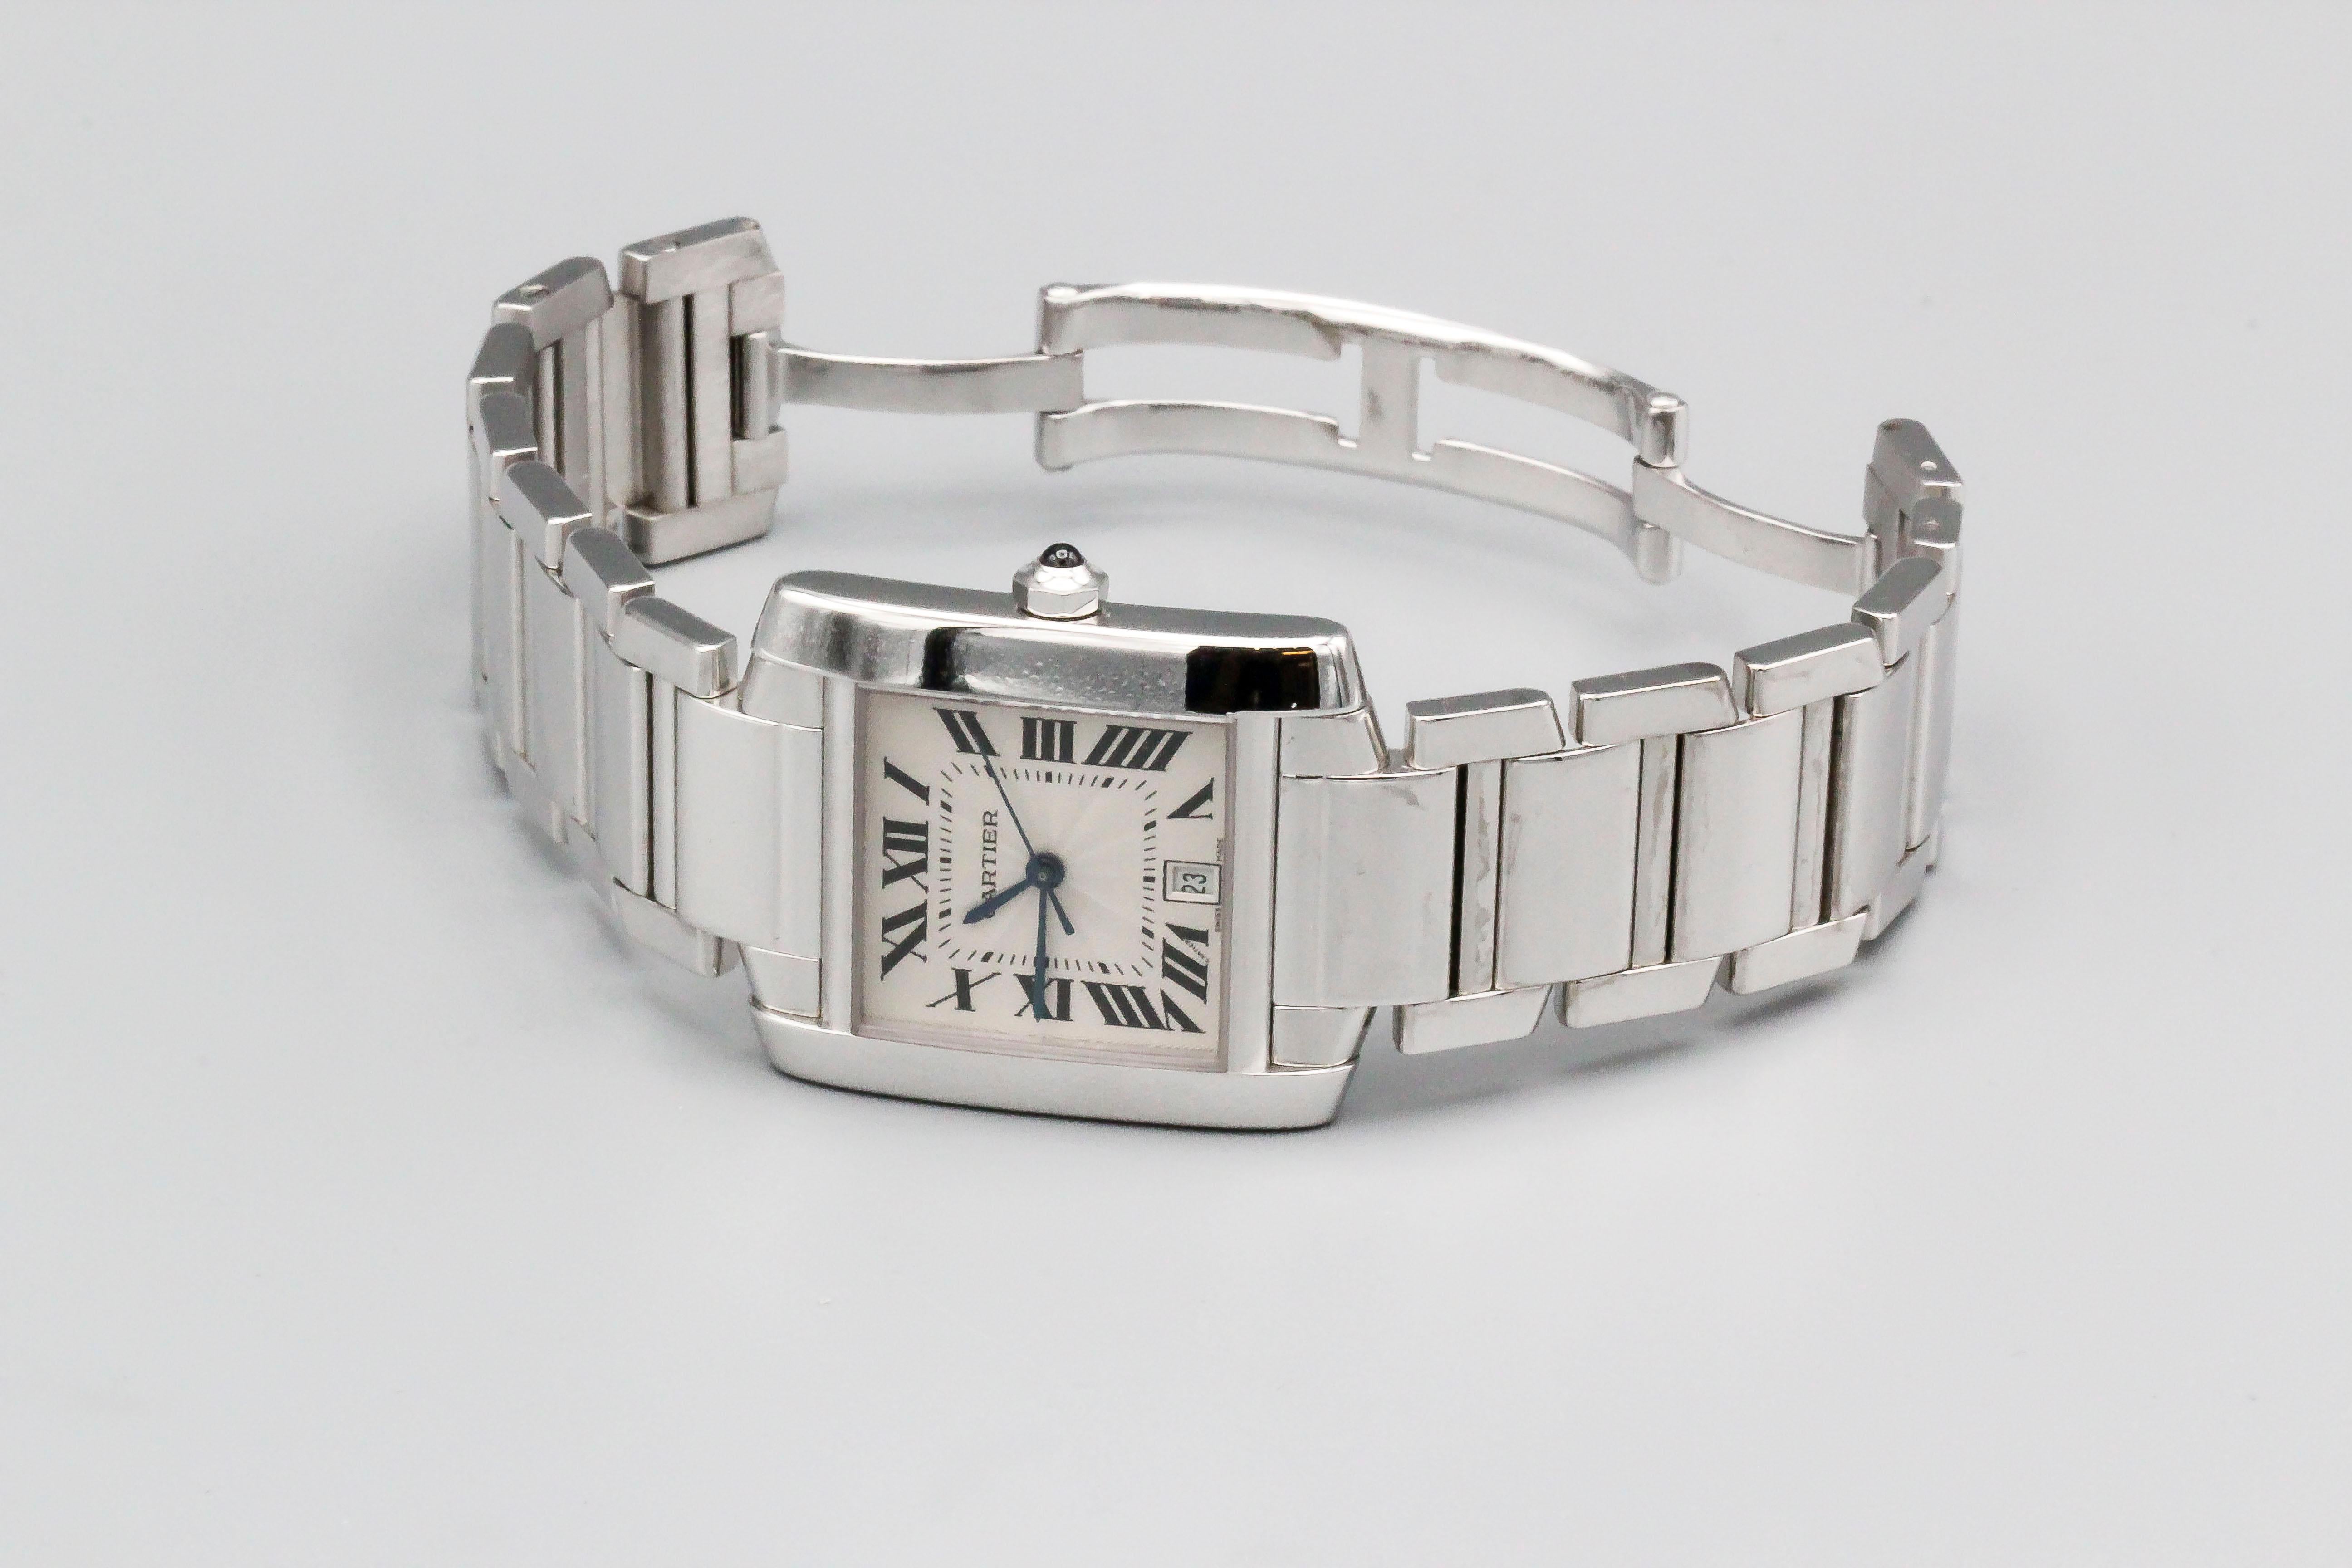 Very handsome 18K white gold men's wrist watch from the 